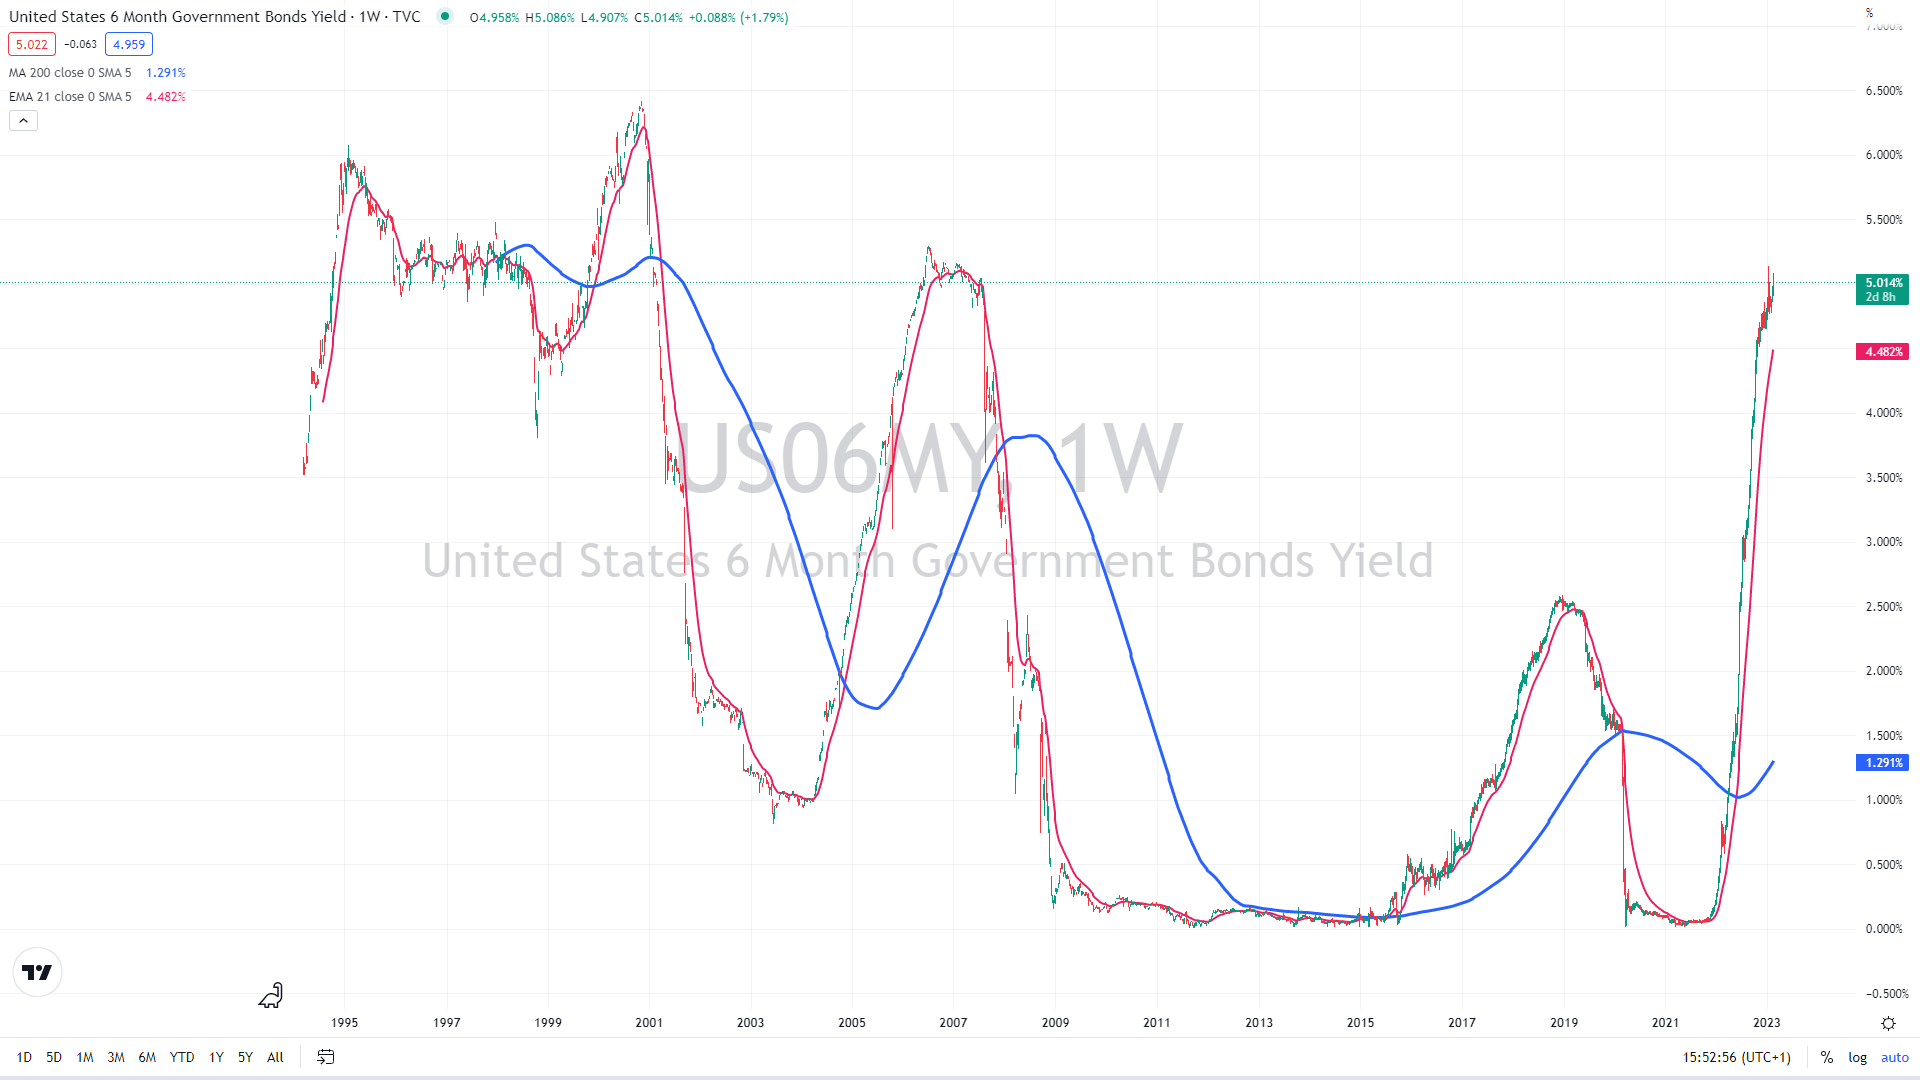 US 6-month yield weekly chart